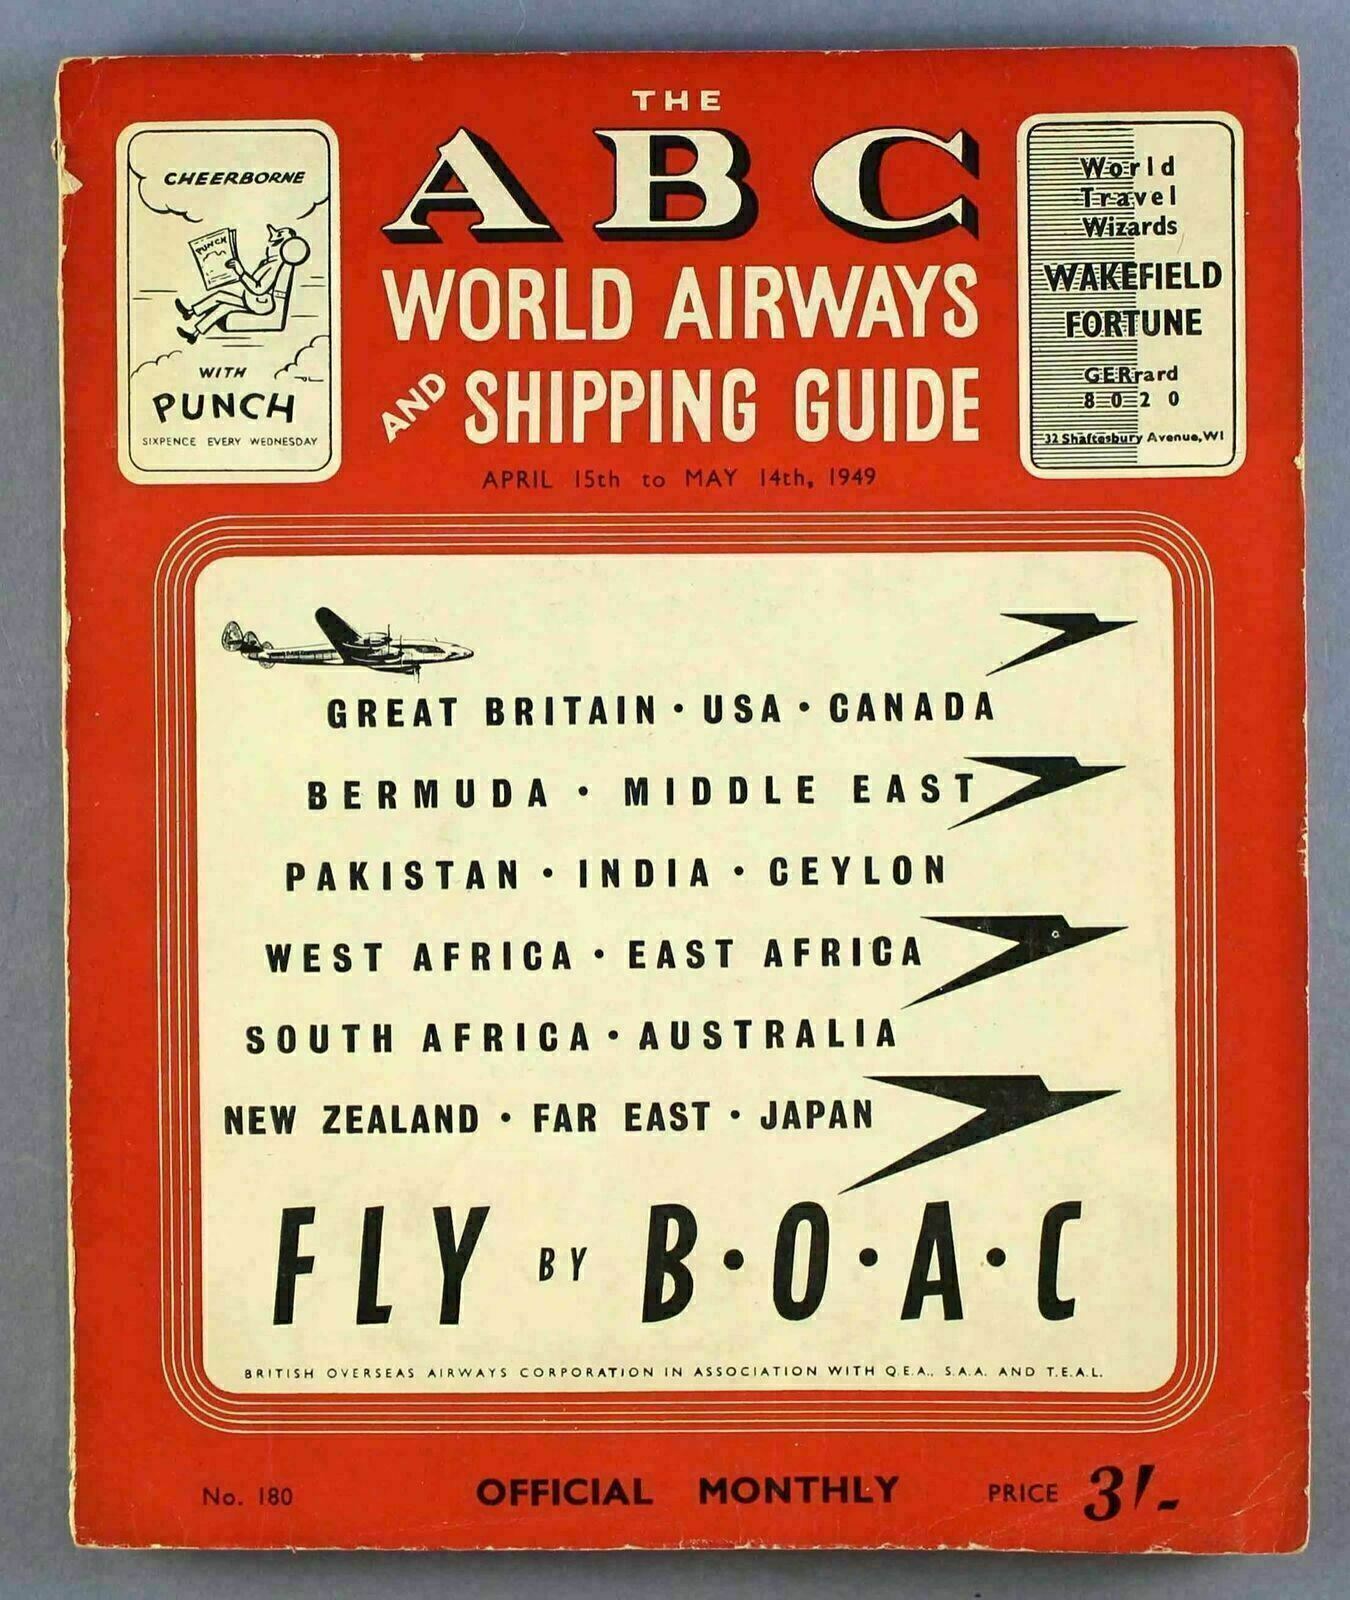 ABC WORLD AIRWAYS GUIDE APRIL-MAY 1949 TIMETABLE IRAQI SIAMESE AIRWAYS CDGT MISR